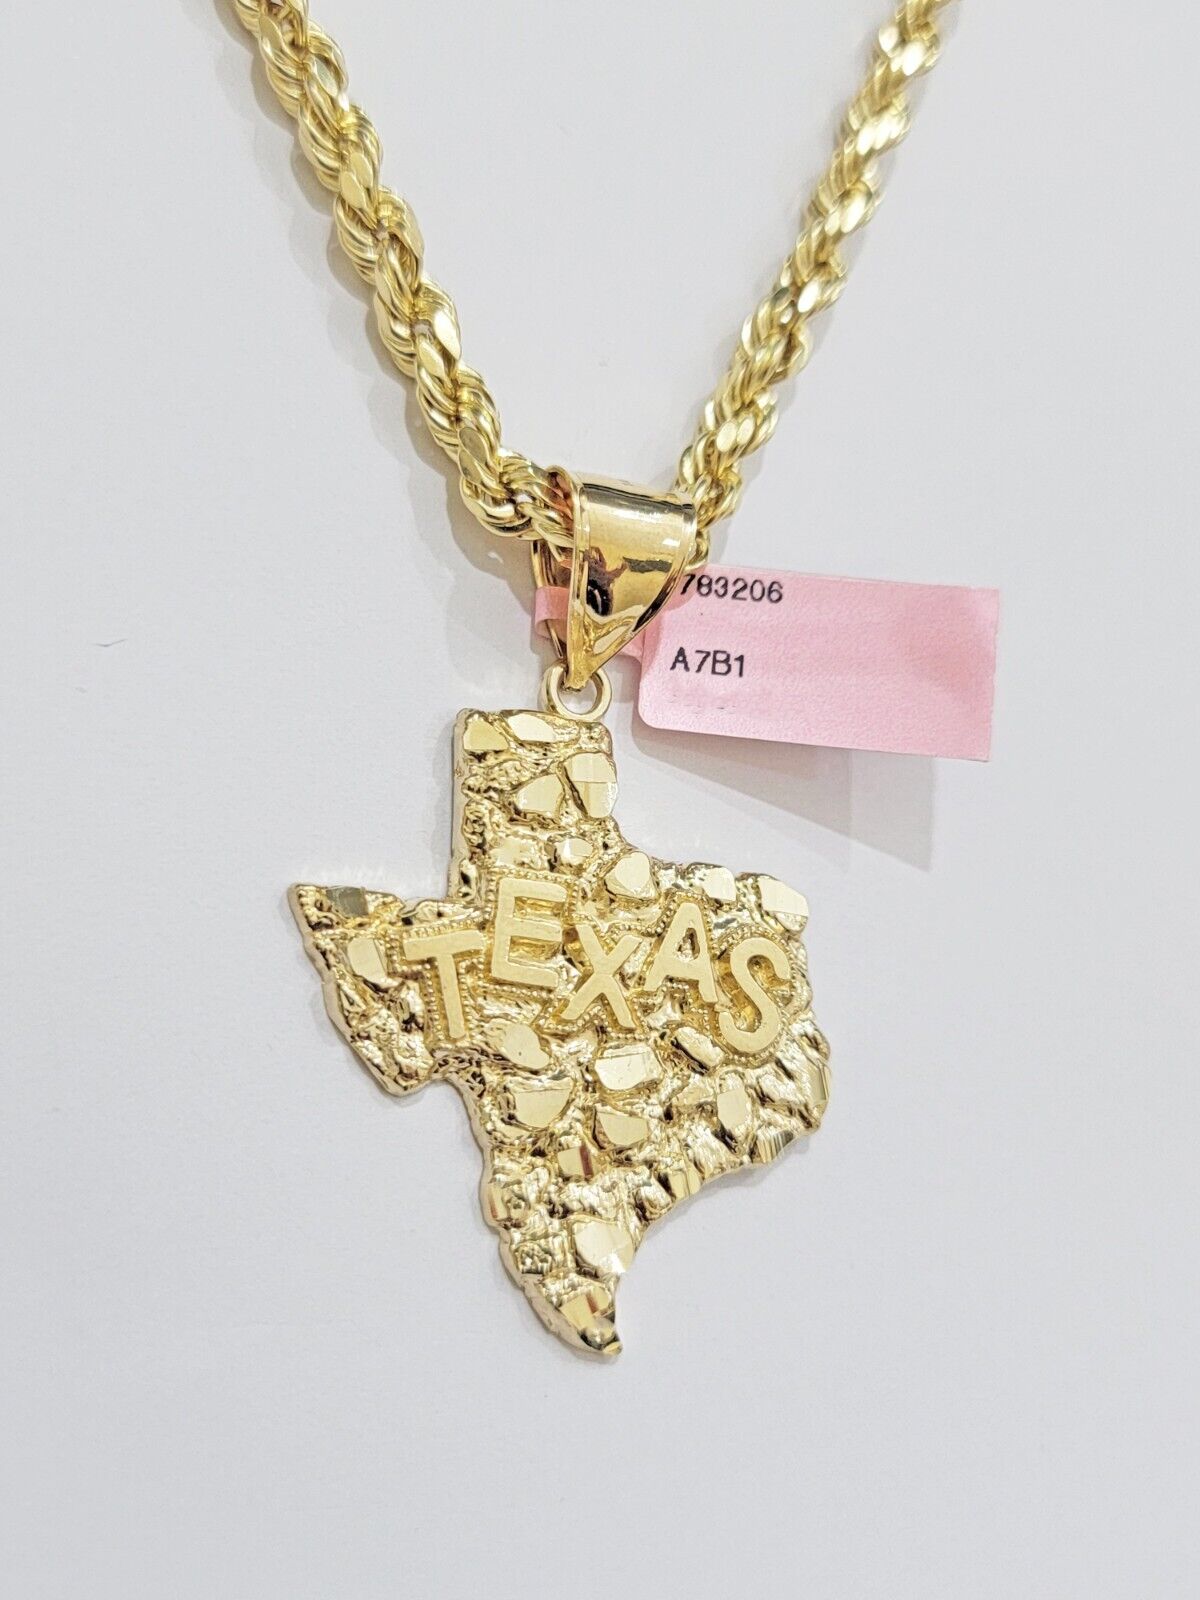 14k Gold Rope Chain & Nugget Texas map Charm pendant & 20 Inch Necklace Set Mens